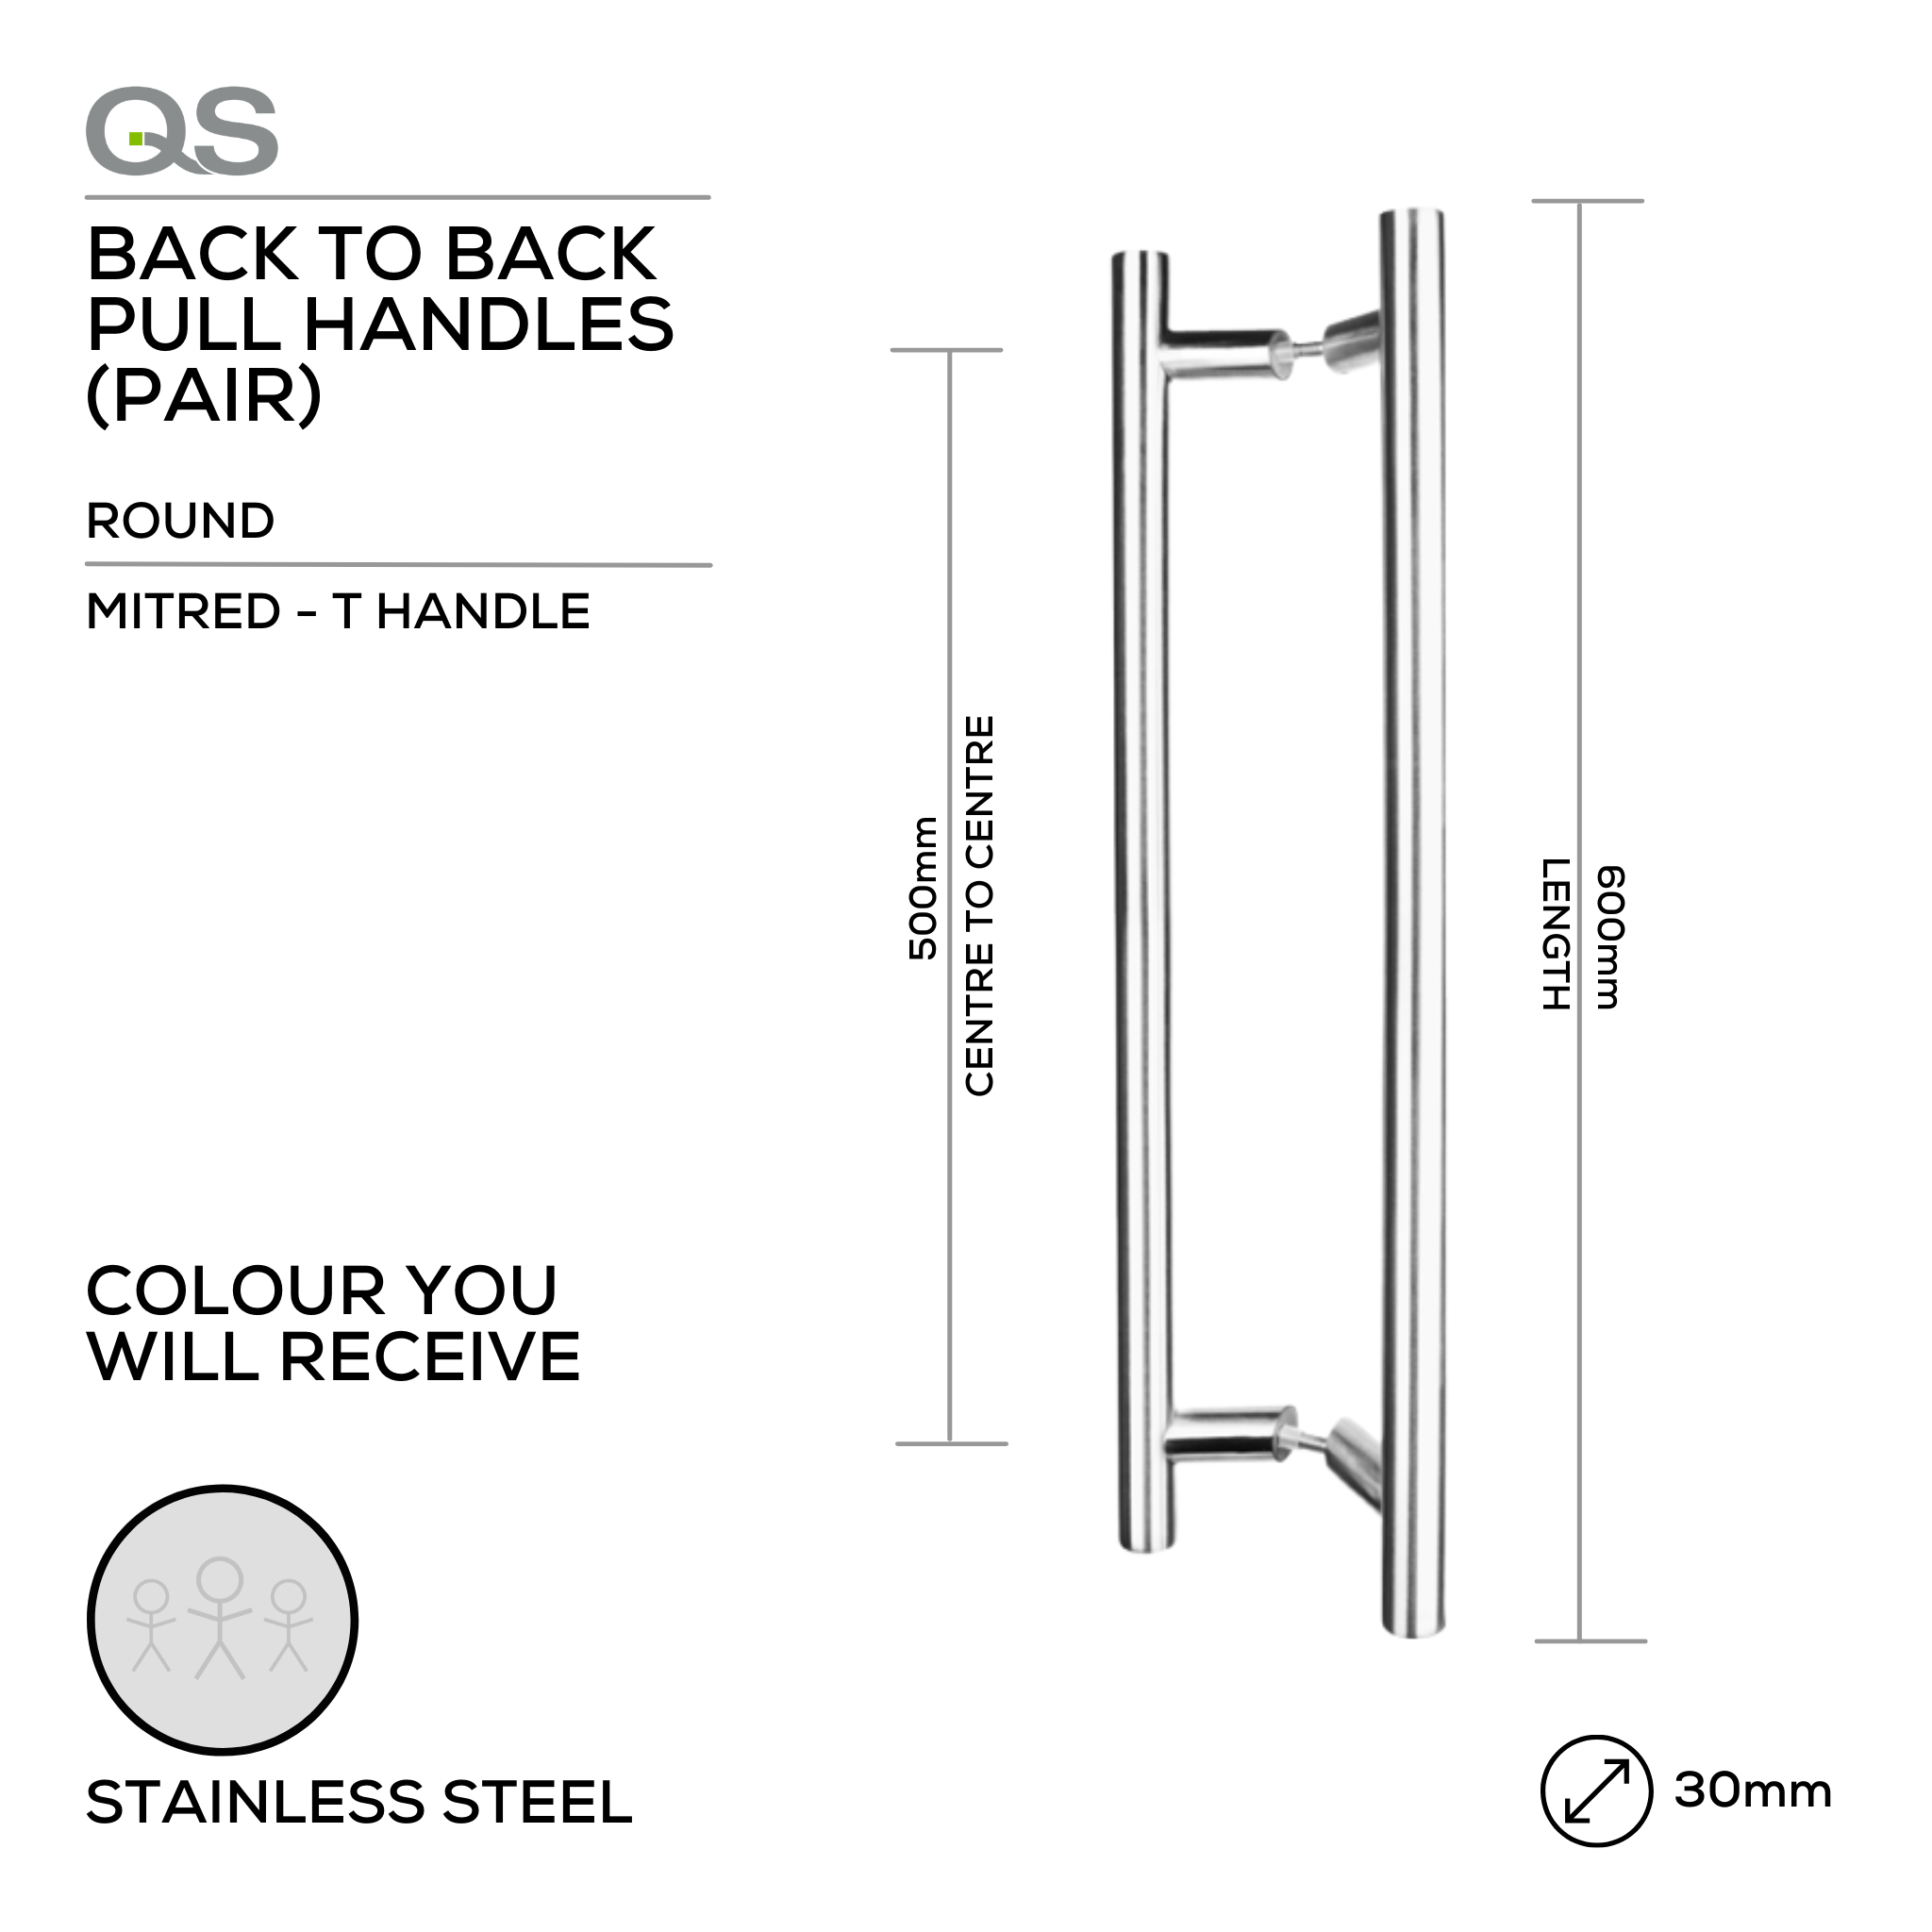 QS2701 Mitred T, Pull Handle, Round, Mitred, T Handle, BTB, 30mm (Ø) x 600mm (l) x 500mm (ctc), Stainless Steel, QS